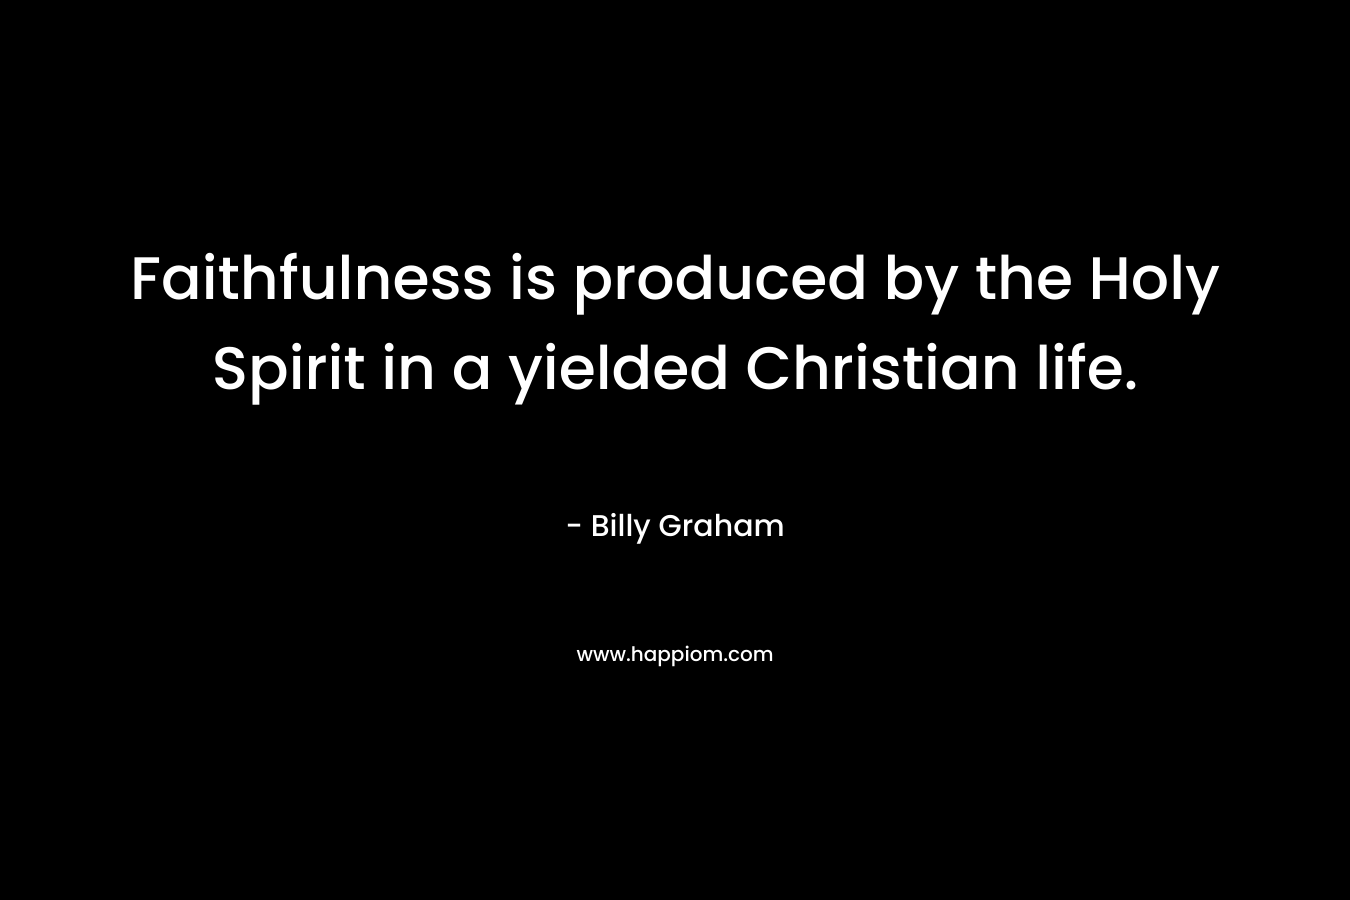 Faithfulness is produced by the Holy Spirit in a yielded Christian life.